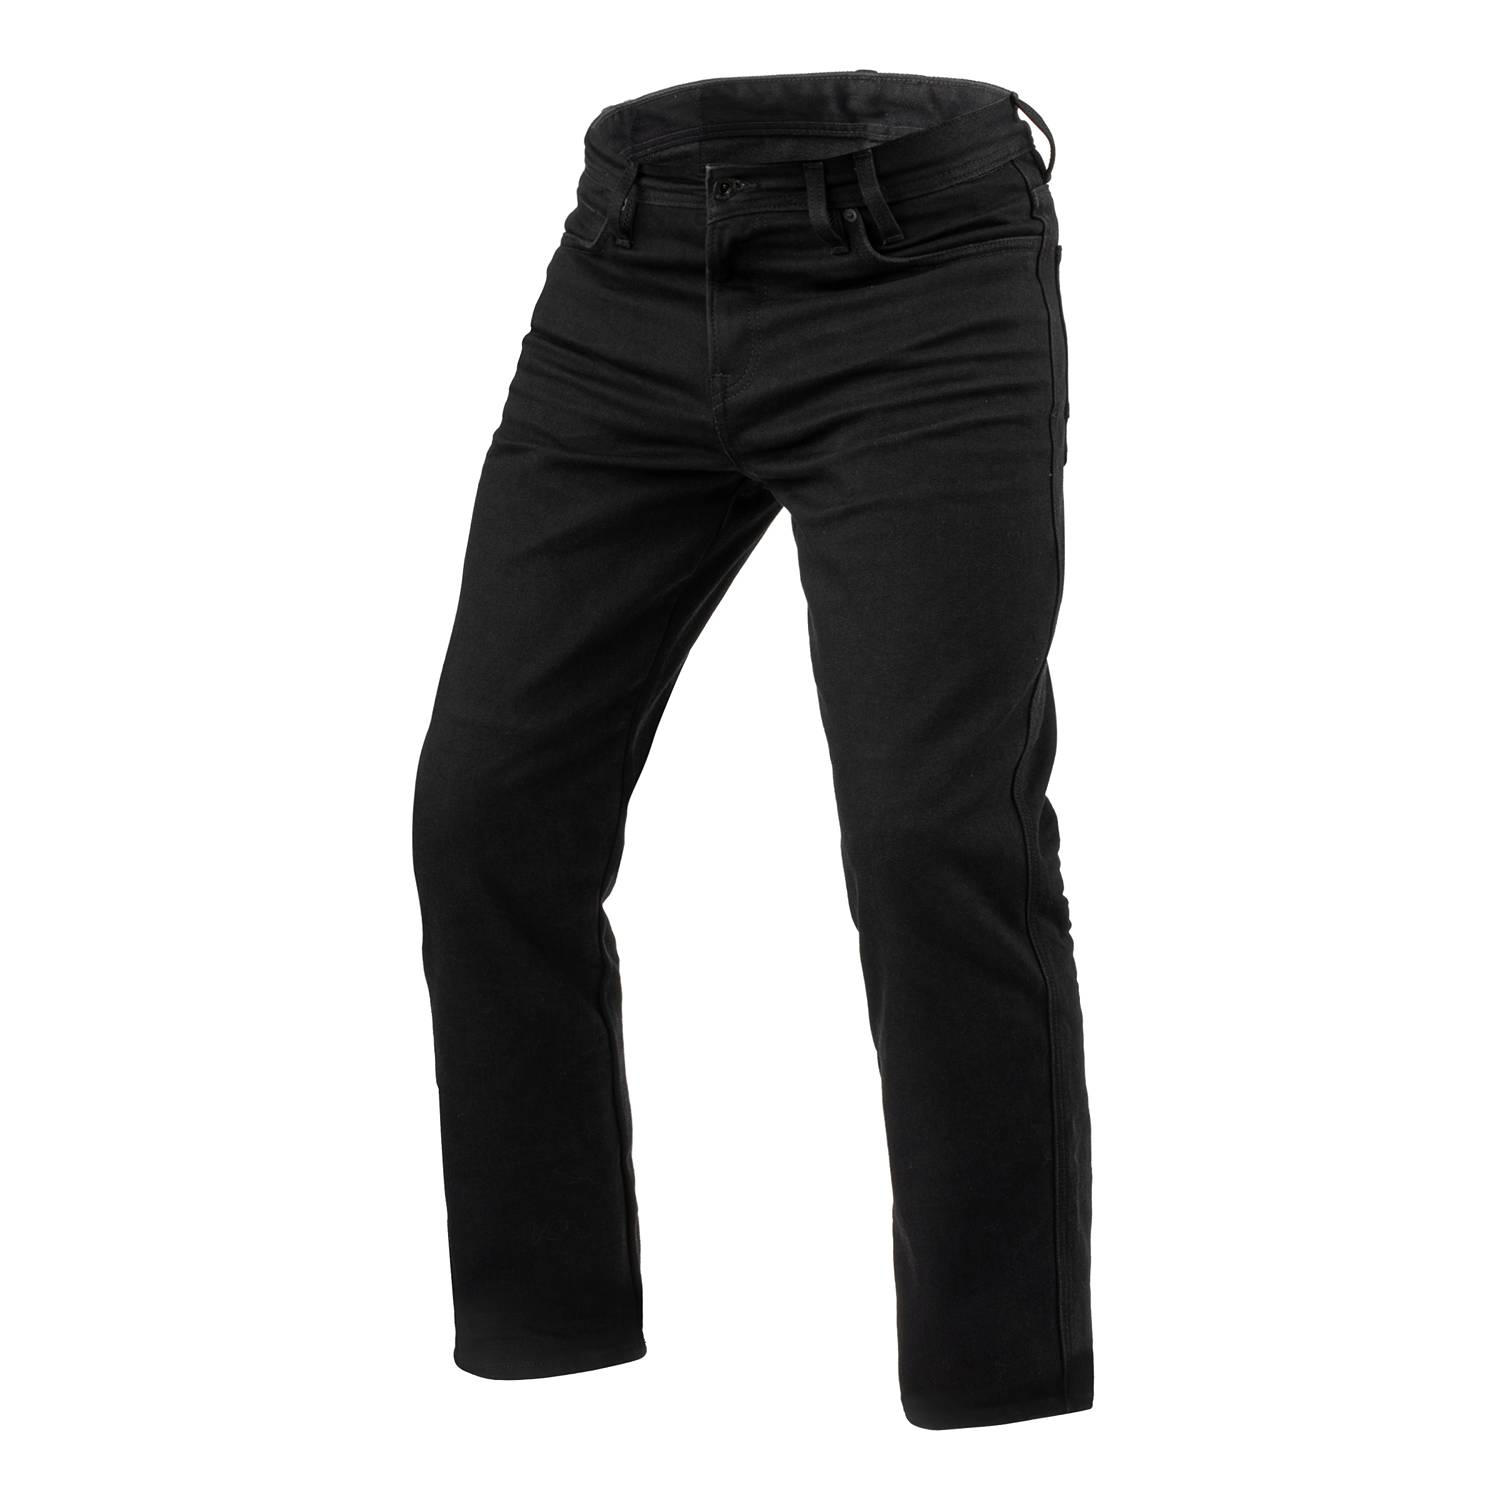 Image of REV'IT! Jeans Lombard 3 RF Black L34 Motorcycle Jeans Taille L34/W28